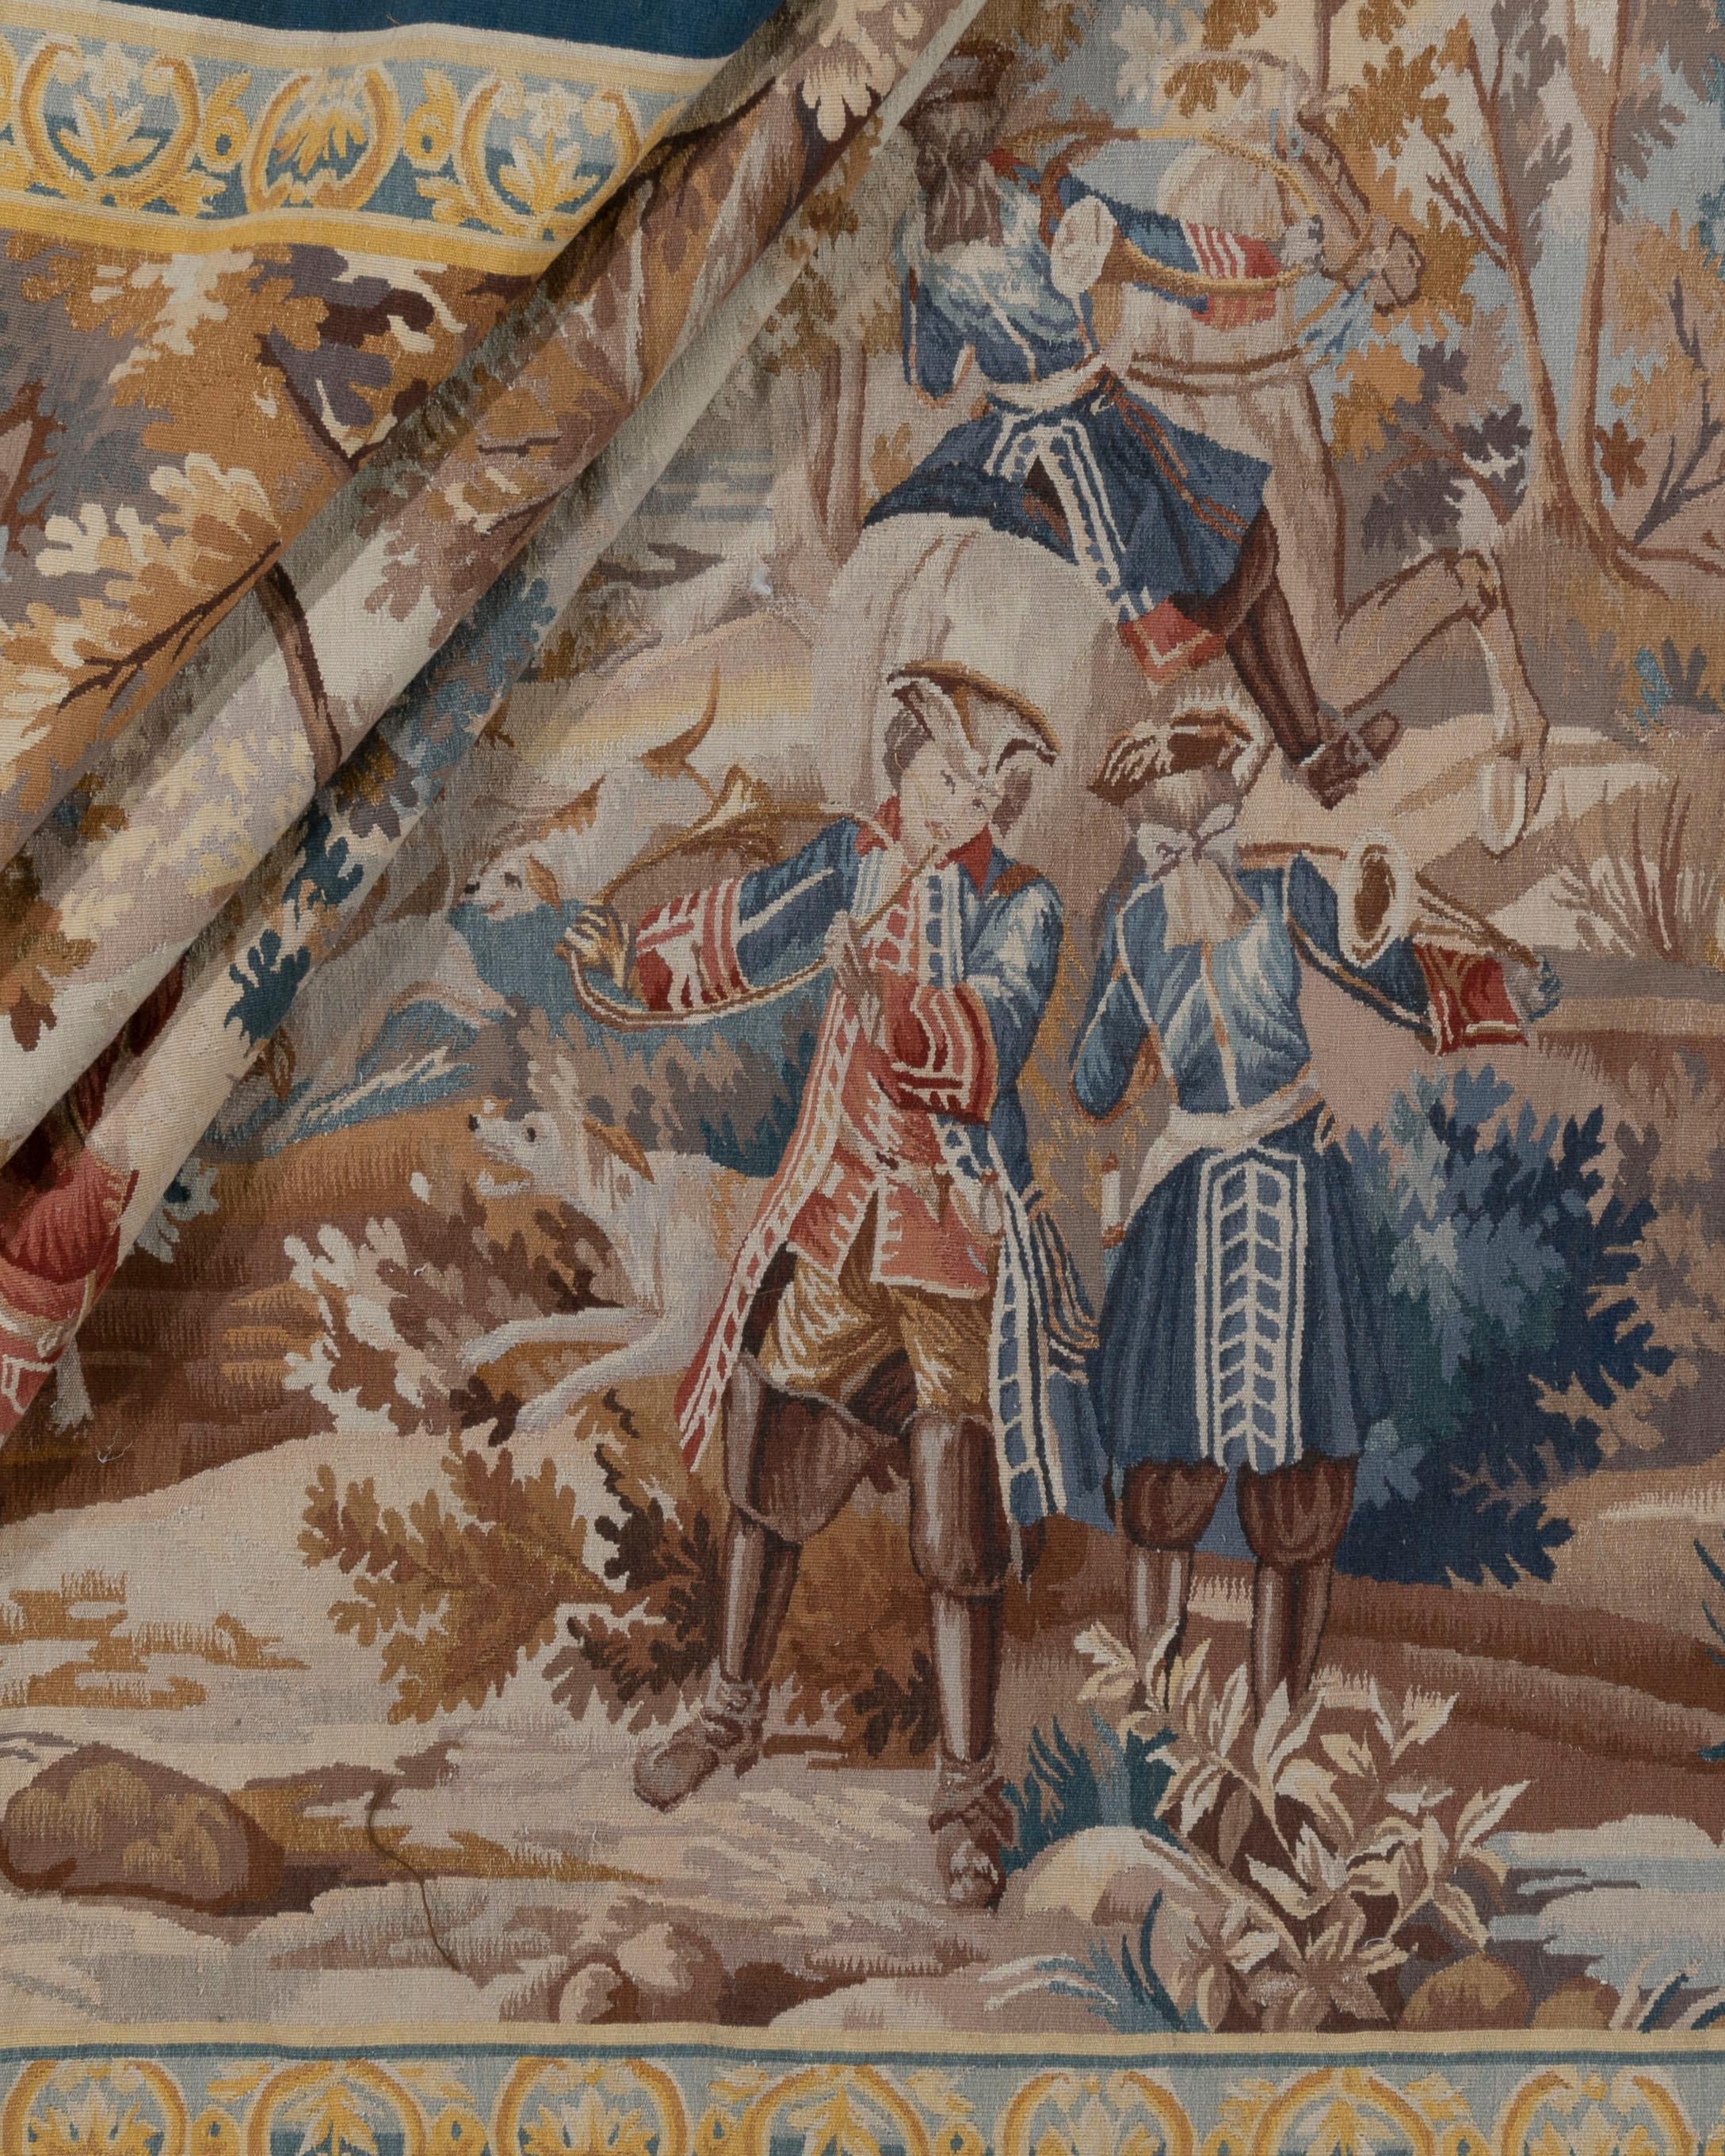 Classic French hunting Scene Tapestry 7'1 x 5'5. A 20th century hand woven reproduction of a classic French hunting scene tapestry.